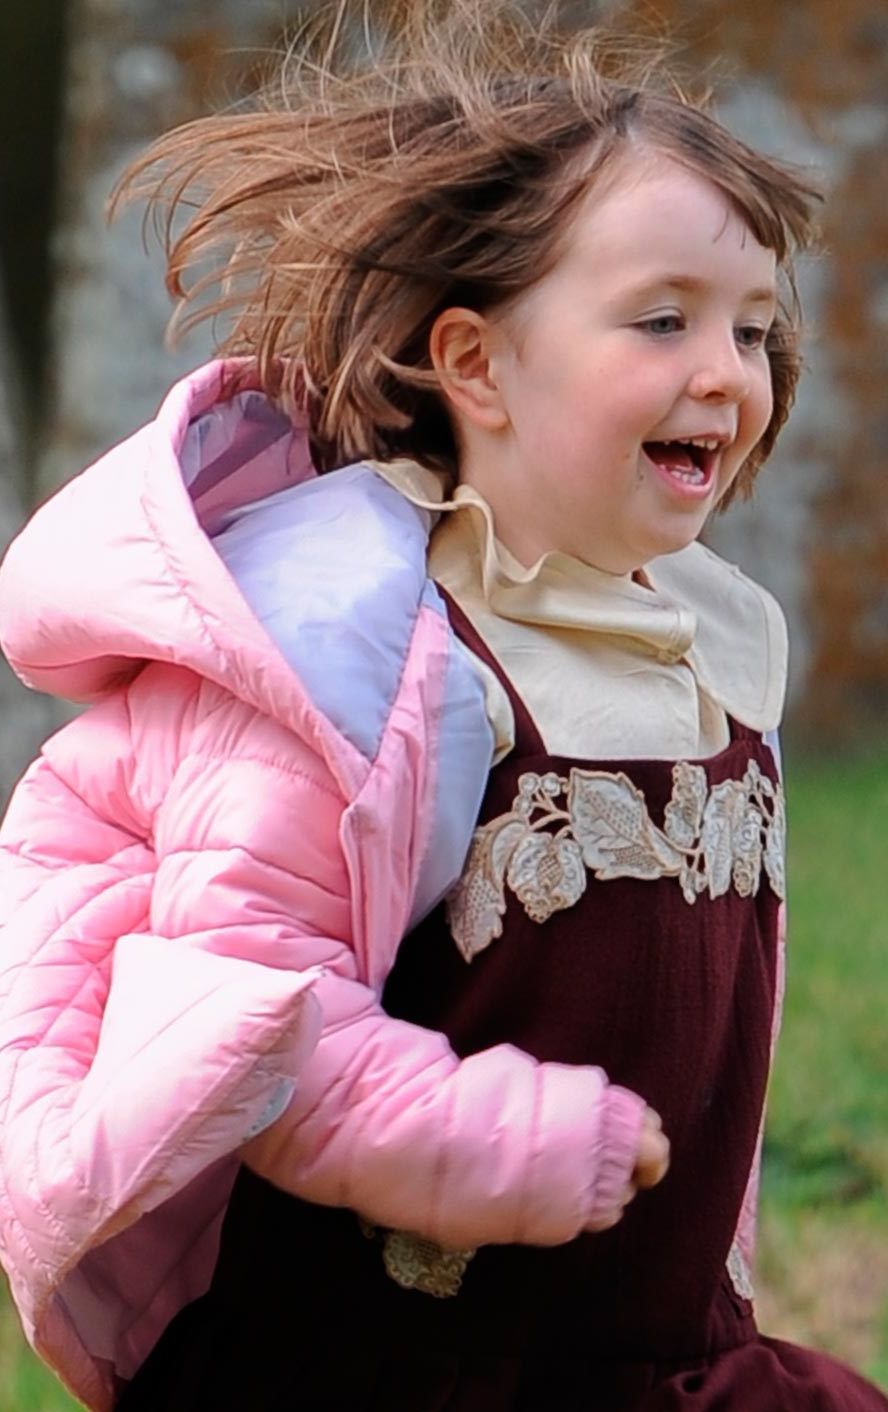 Sleeve, Happy, Pink, Jacket, People in nature, Child, Baby & toddler clothing, Organ, Toddler, Tooth, 